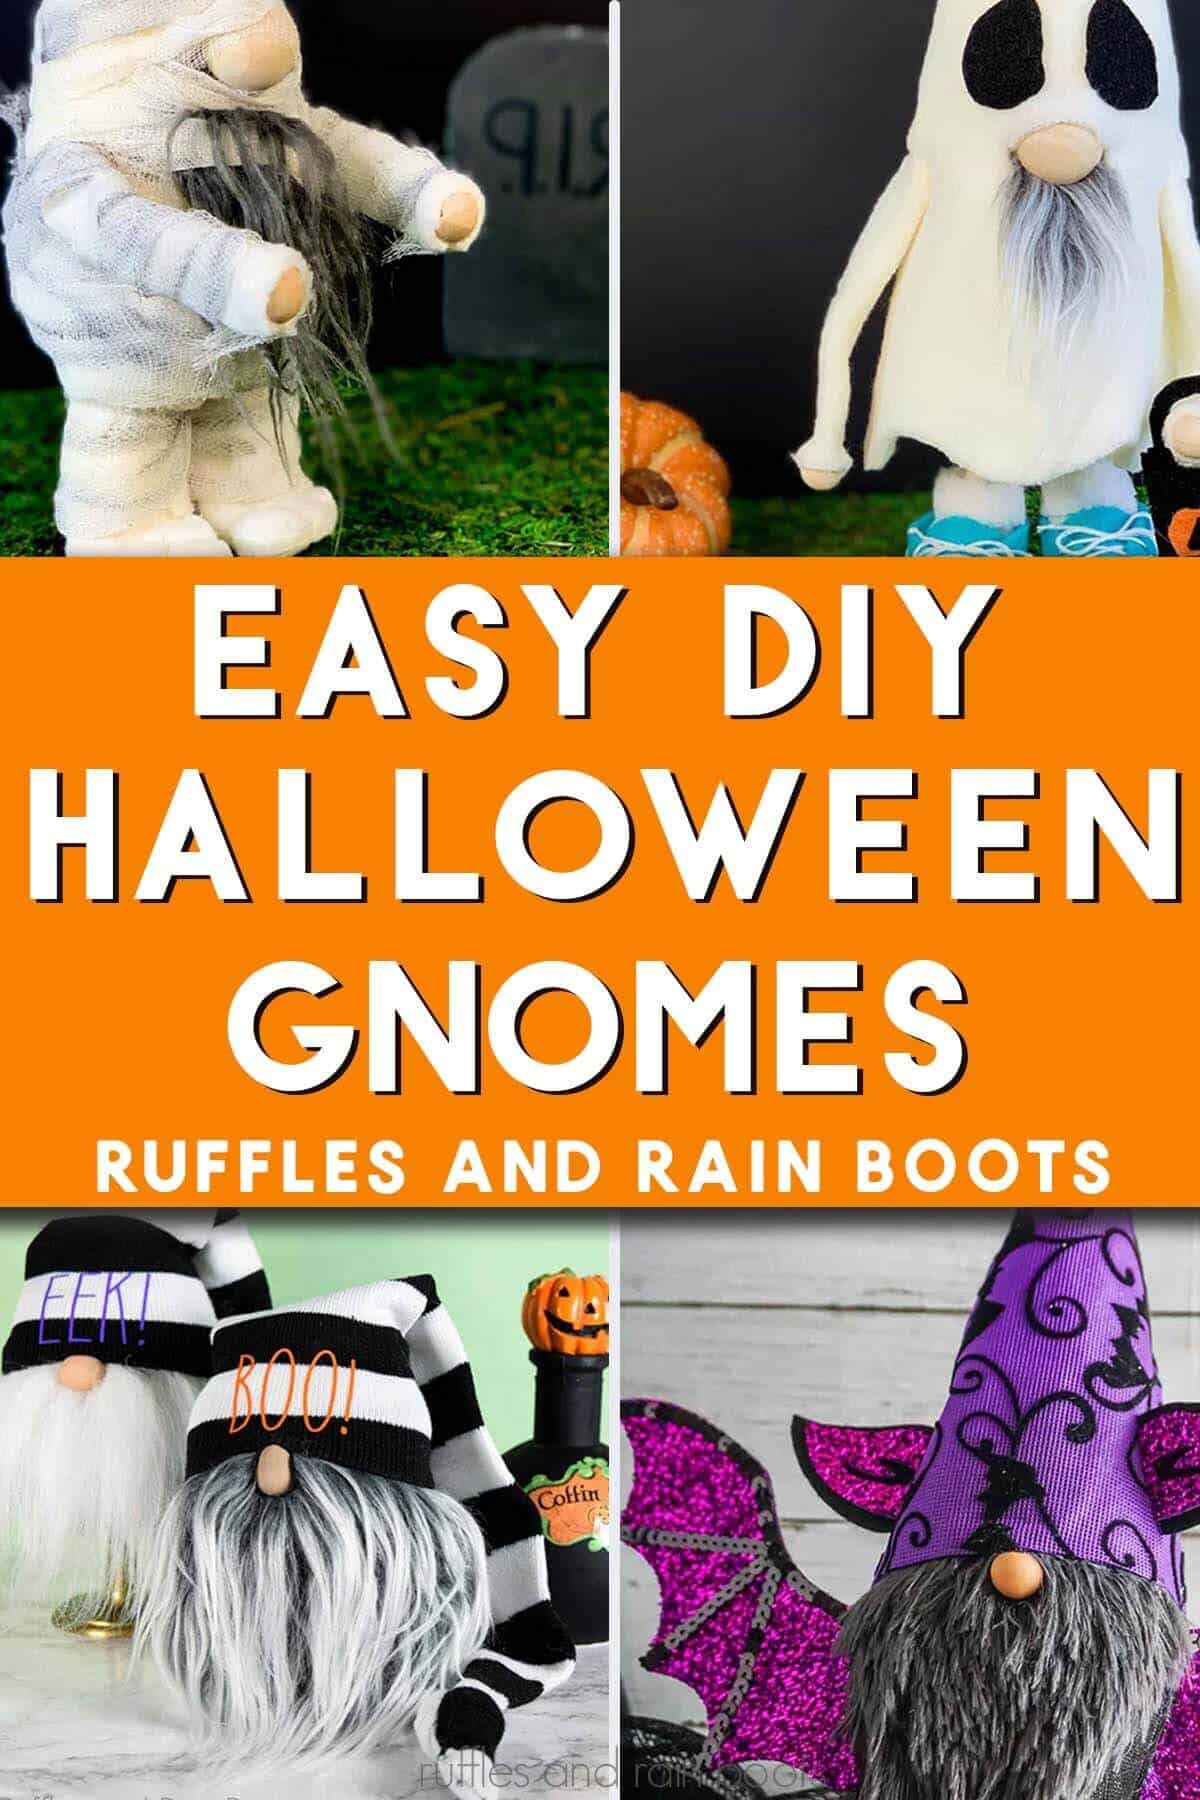 Vertical four image collage of mummy, ghost, sock, and bat gnomes with text which reads easy DIY Halloween gnomes.